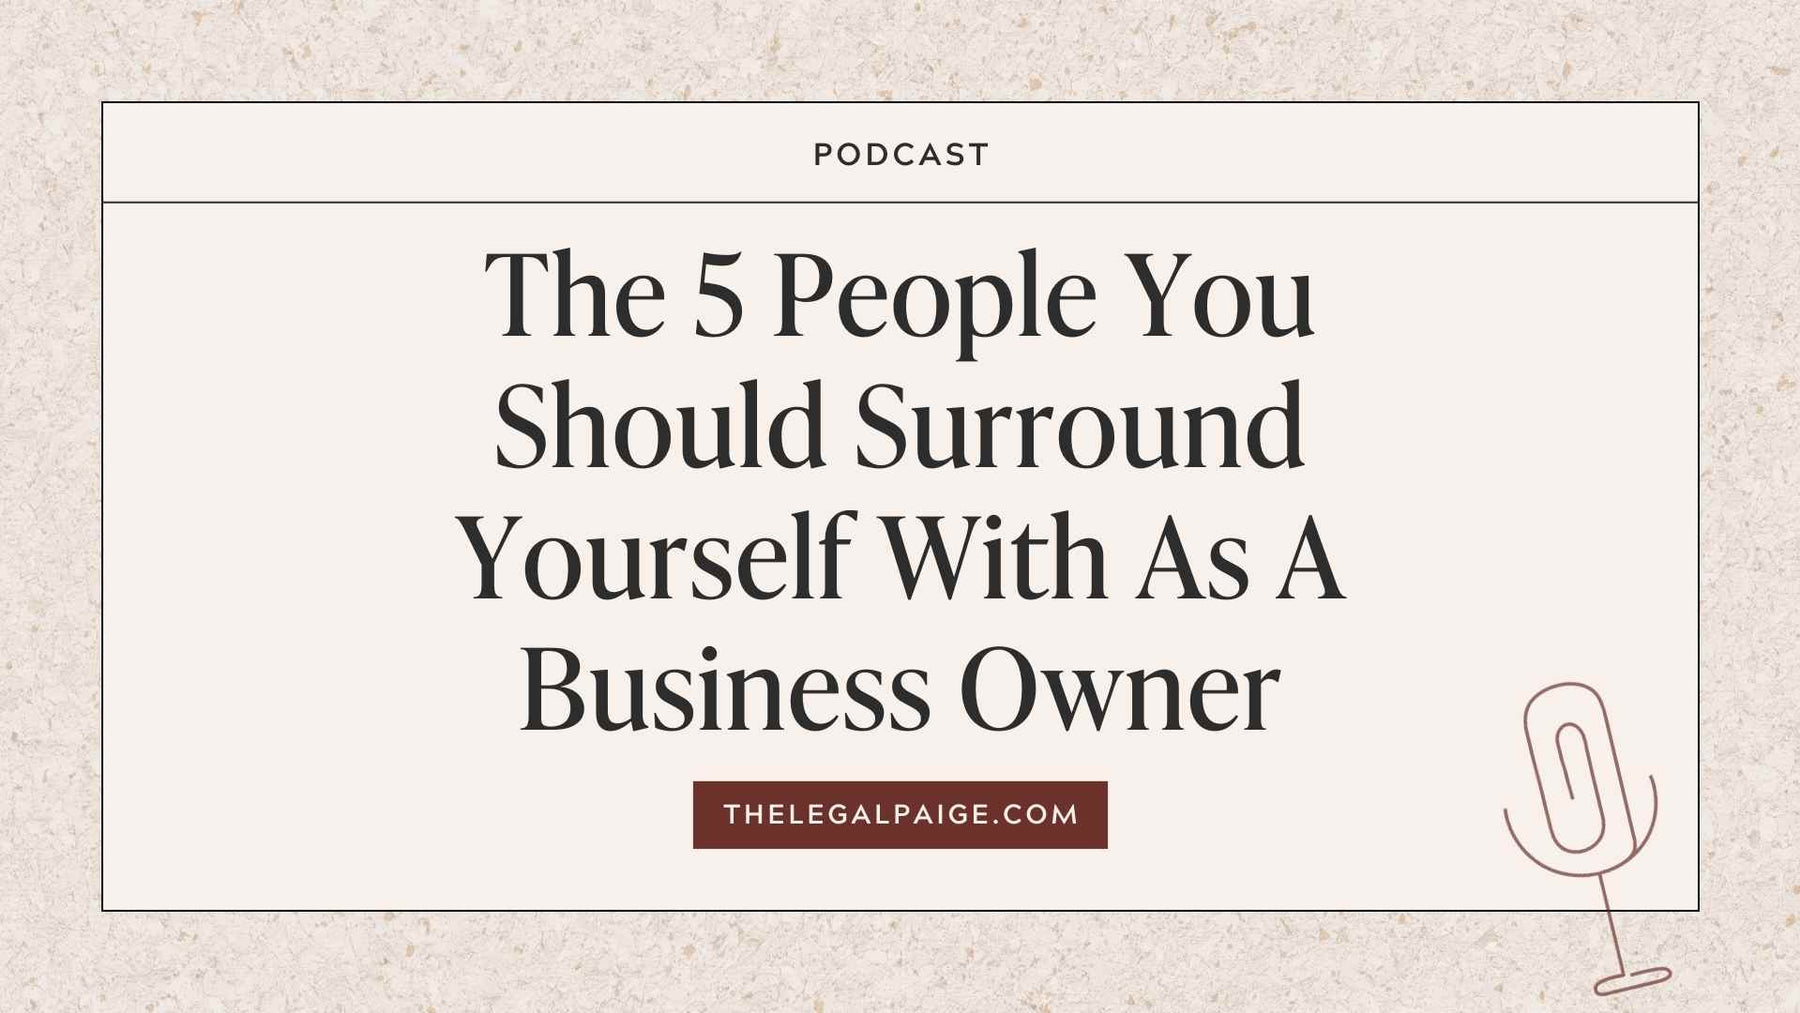 Episode 105: The 5 People You Should Surround Yourself With As a Business Owner